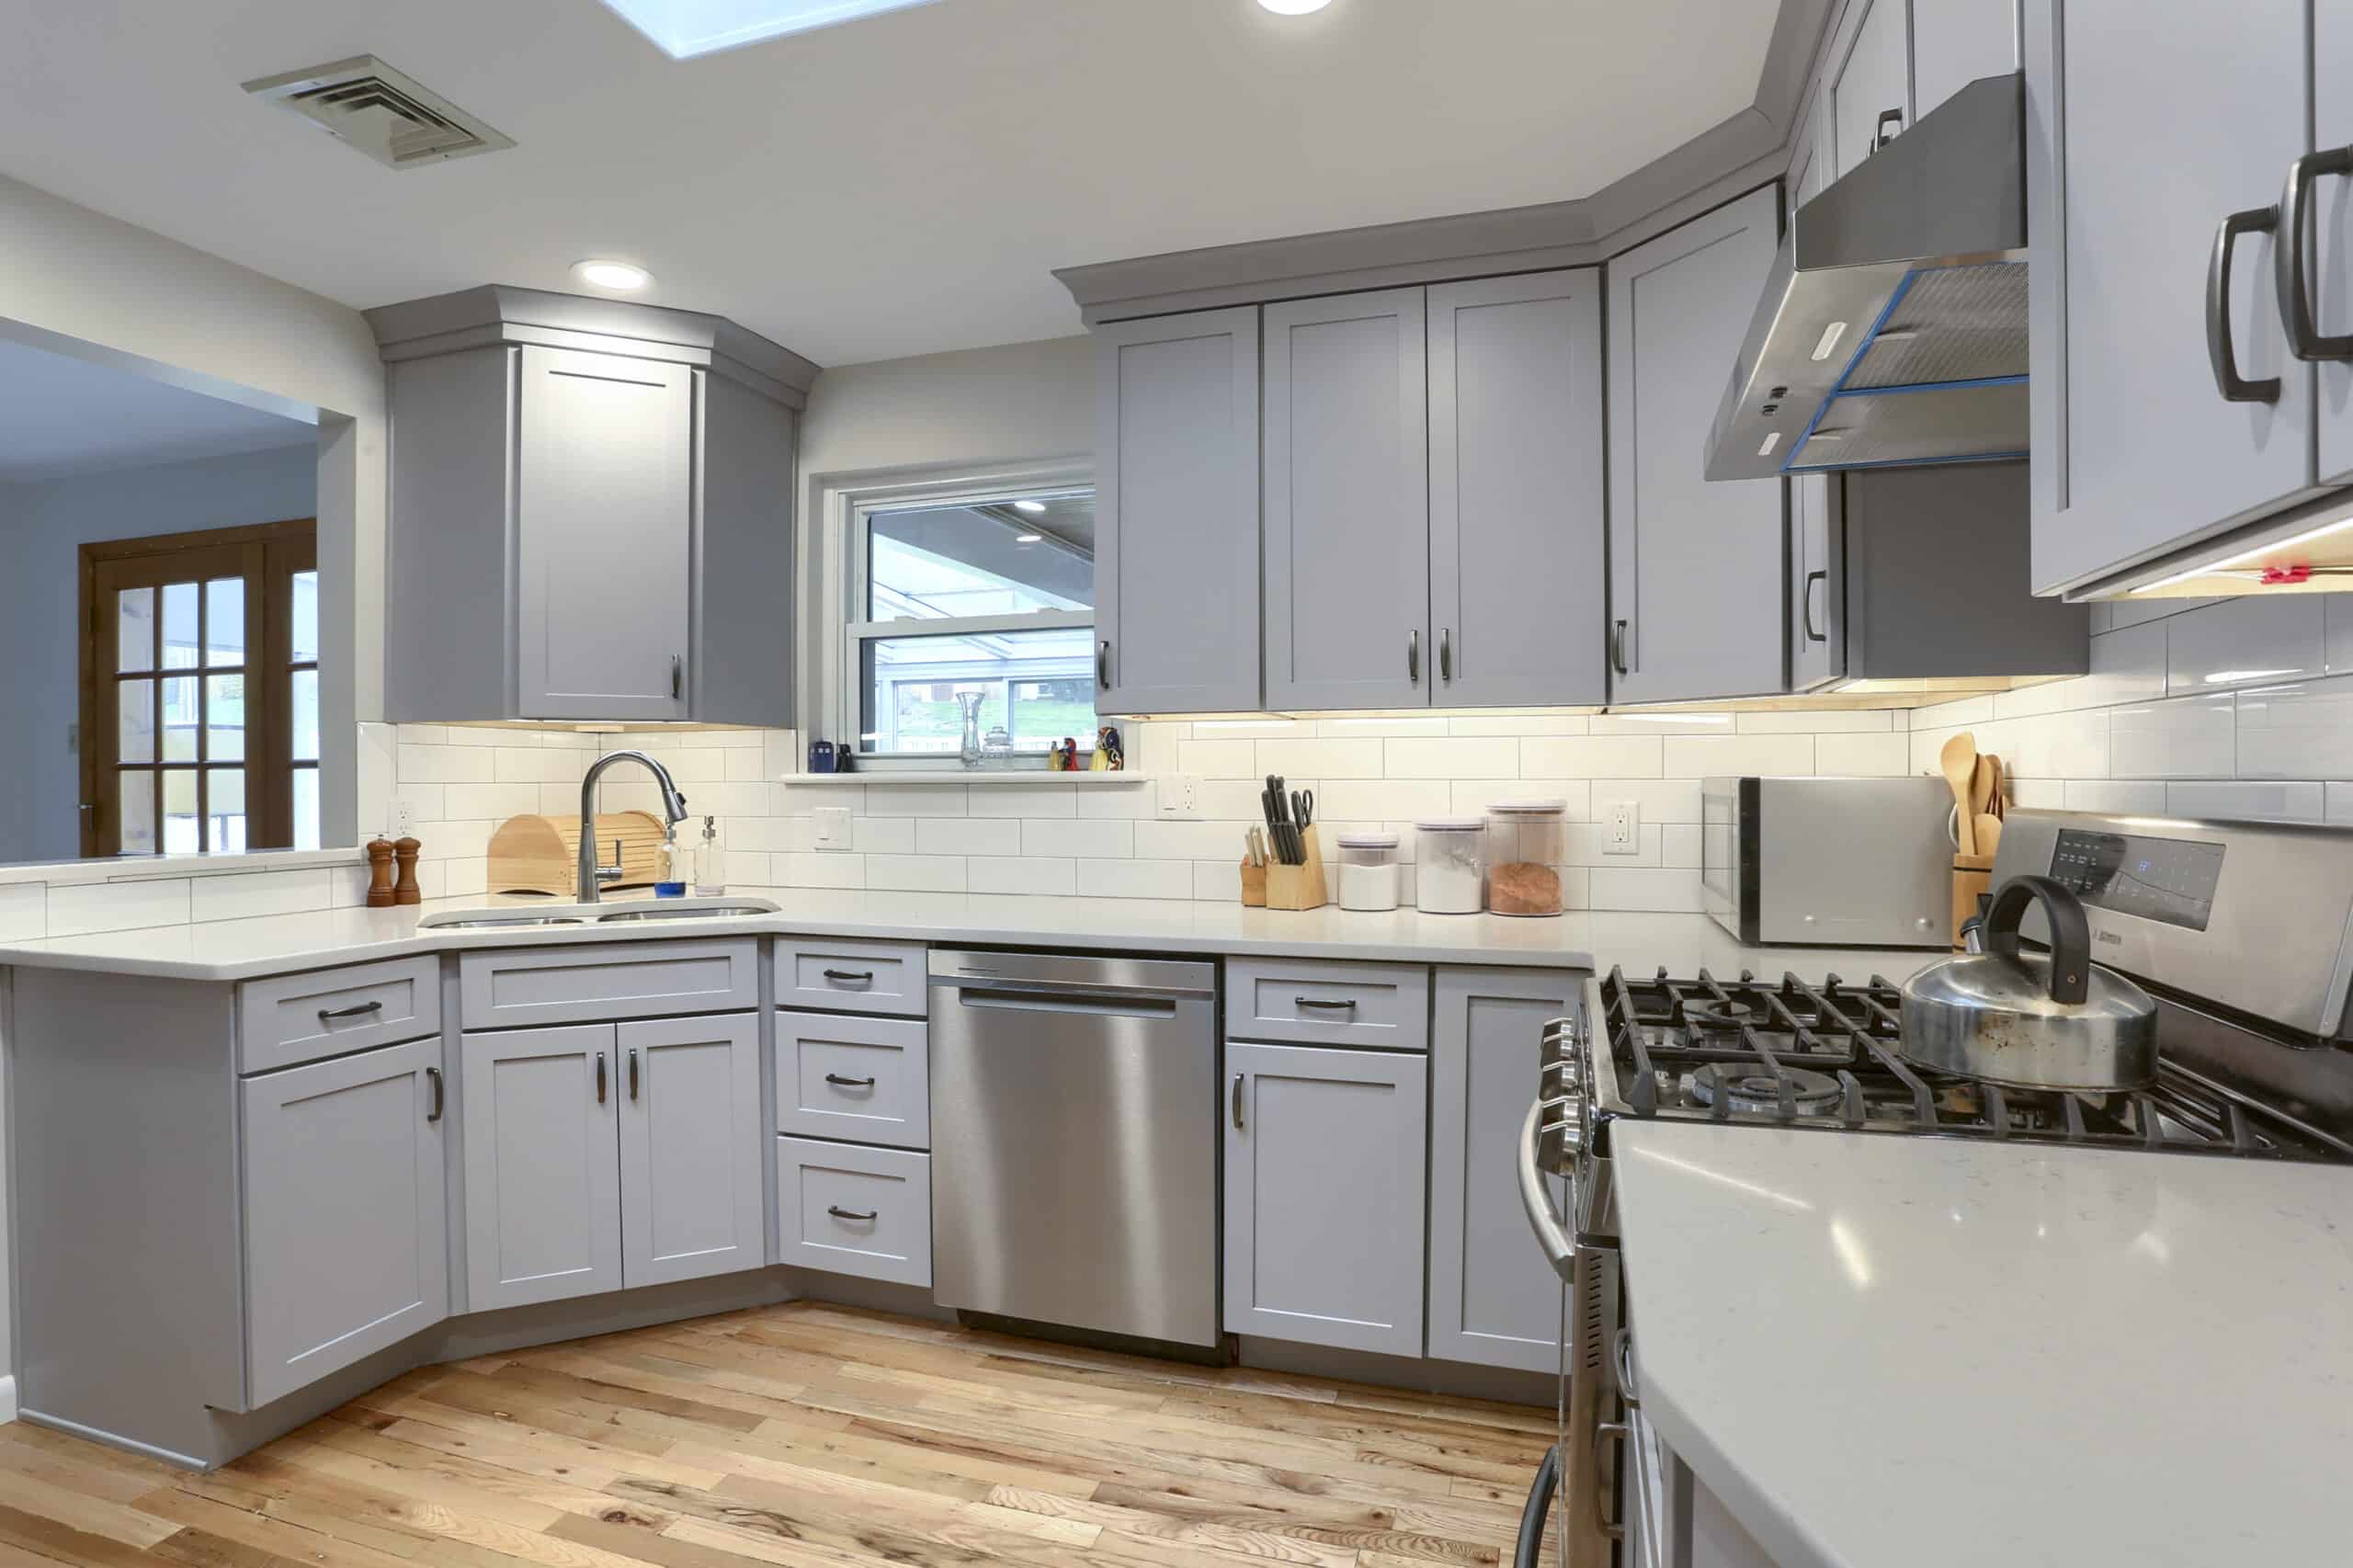 Harrisburg Kitchen & Bath: Expert Remodeling Services in PA